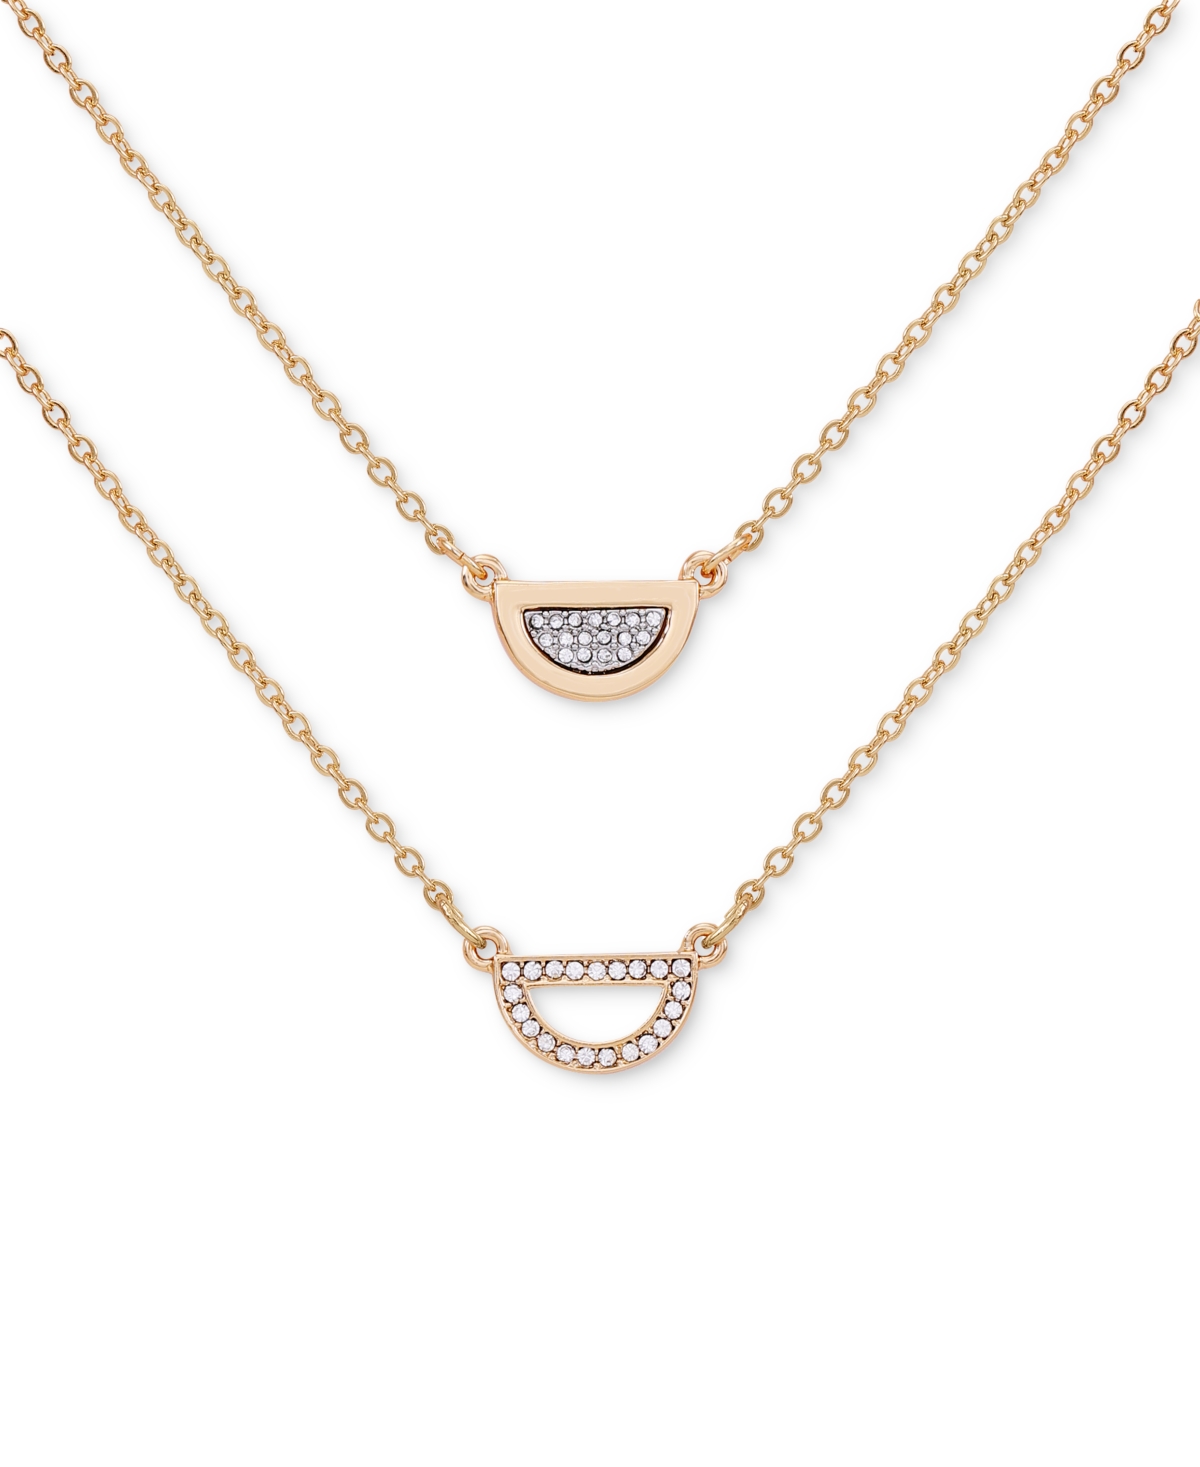 Guess Gold-tone 2-pc. Set Pave Semi-circle Pendant Necklaces, 16" + 2" Extender In Gold Garnet